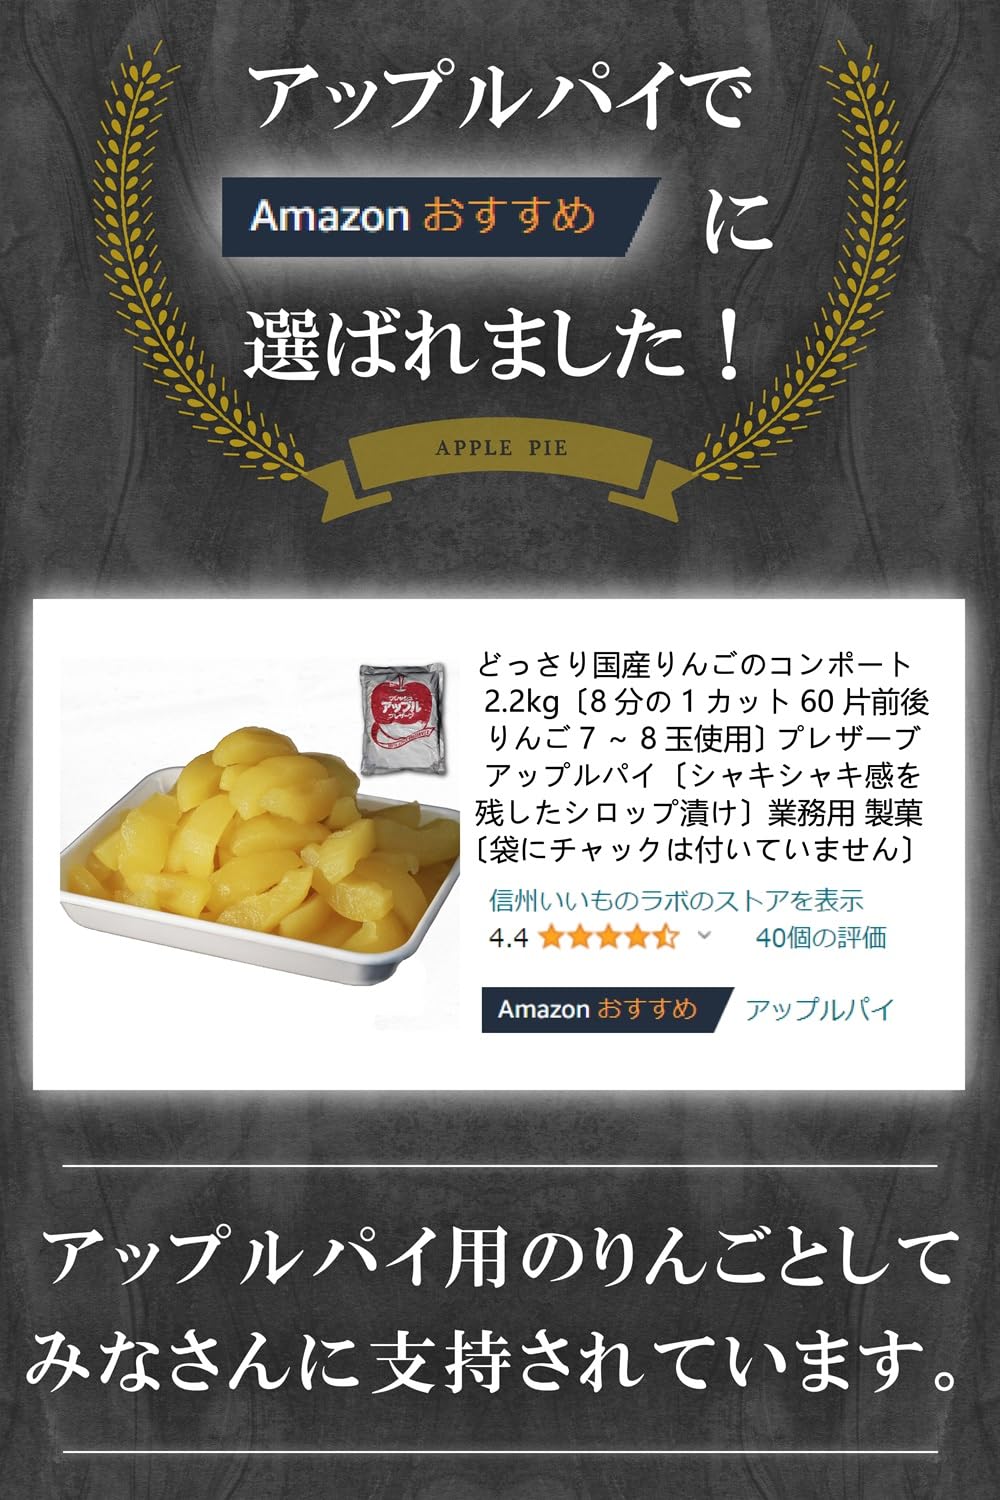 Domestic Apple Compote 4.9 lbs (2.2 kg) (1/8 Cut 60 Apples, 7 to 8 Apples), Preserved Apple Pie (Pickled in Syrup that Leaves a Crunchy Feeling), Commercial Confectionery (Bag Does Not Have a Zipper)